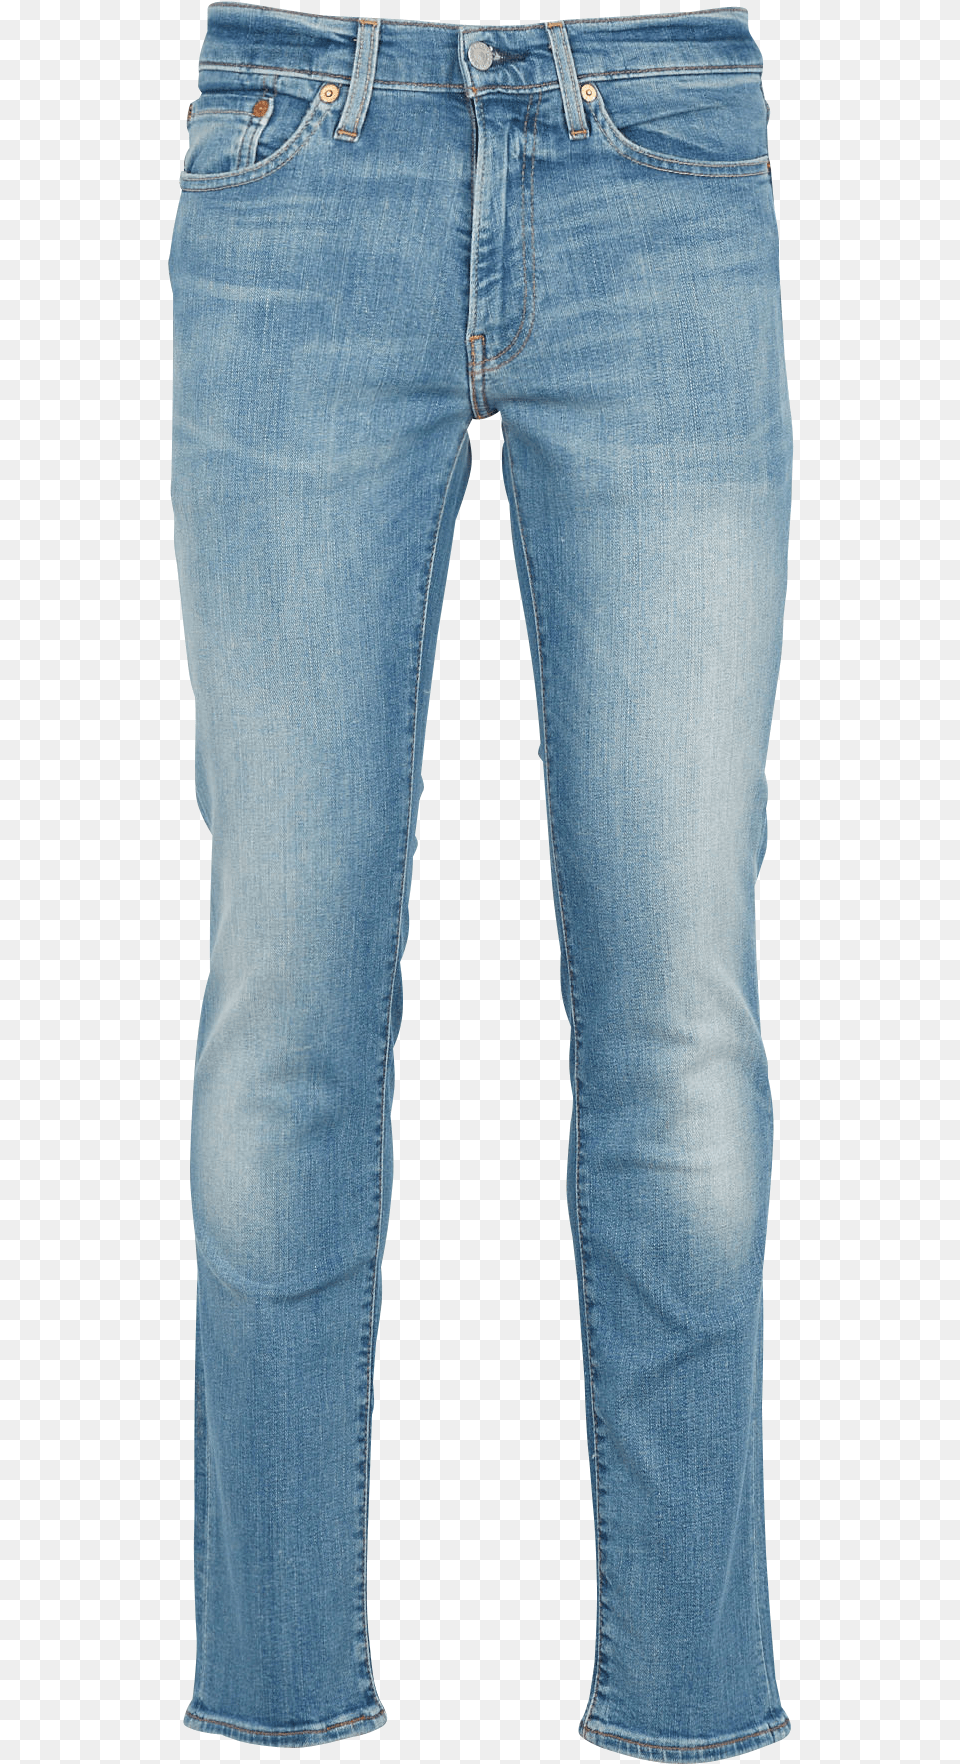 Levis Light Wash Jeans Cheaper Than Solid, Clothing, Pants Png